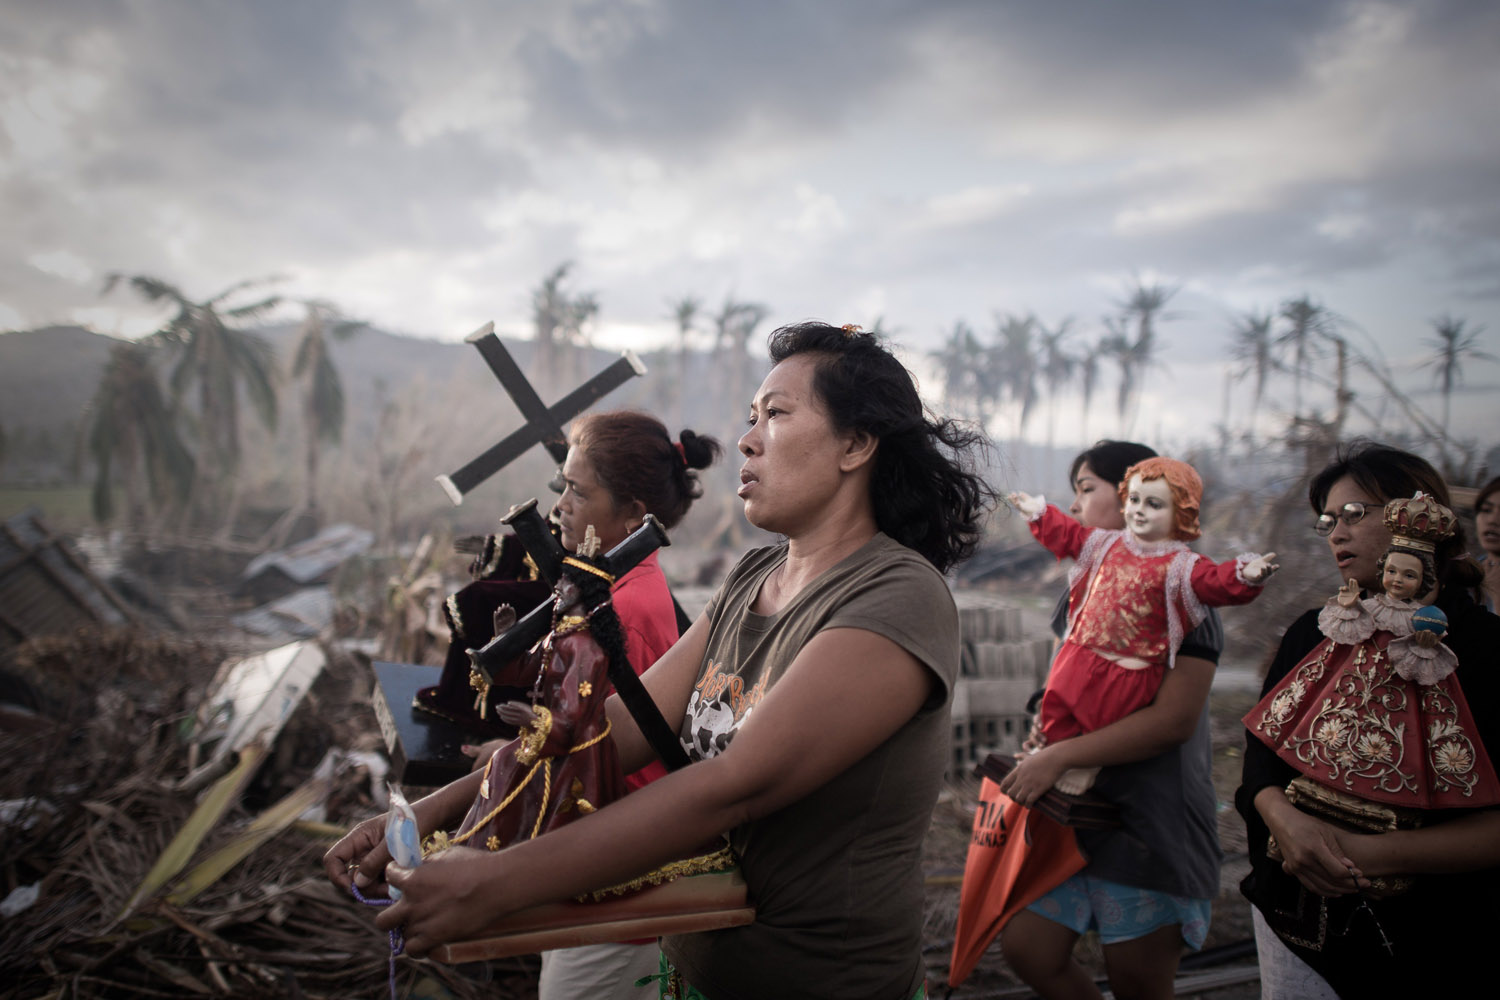 Nov. 18, 2013. Survivors of Super Typhoon Haiyan march during a religious procession in Tolosa on the eastern Philippine island of Leyte over one week after Super Typhoon Haiyan devastated the area.